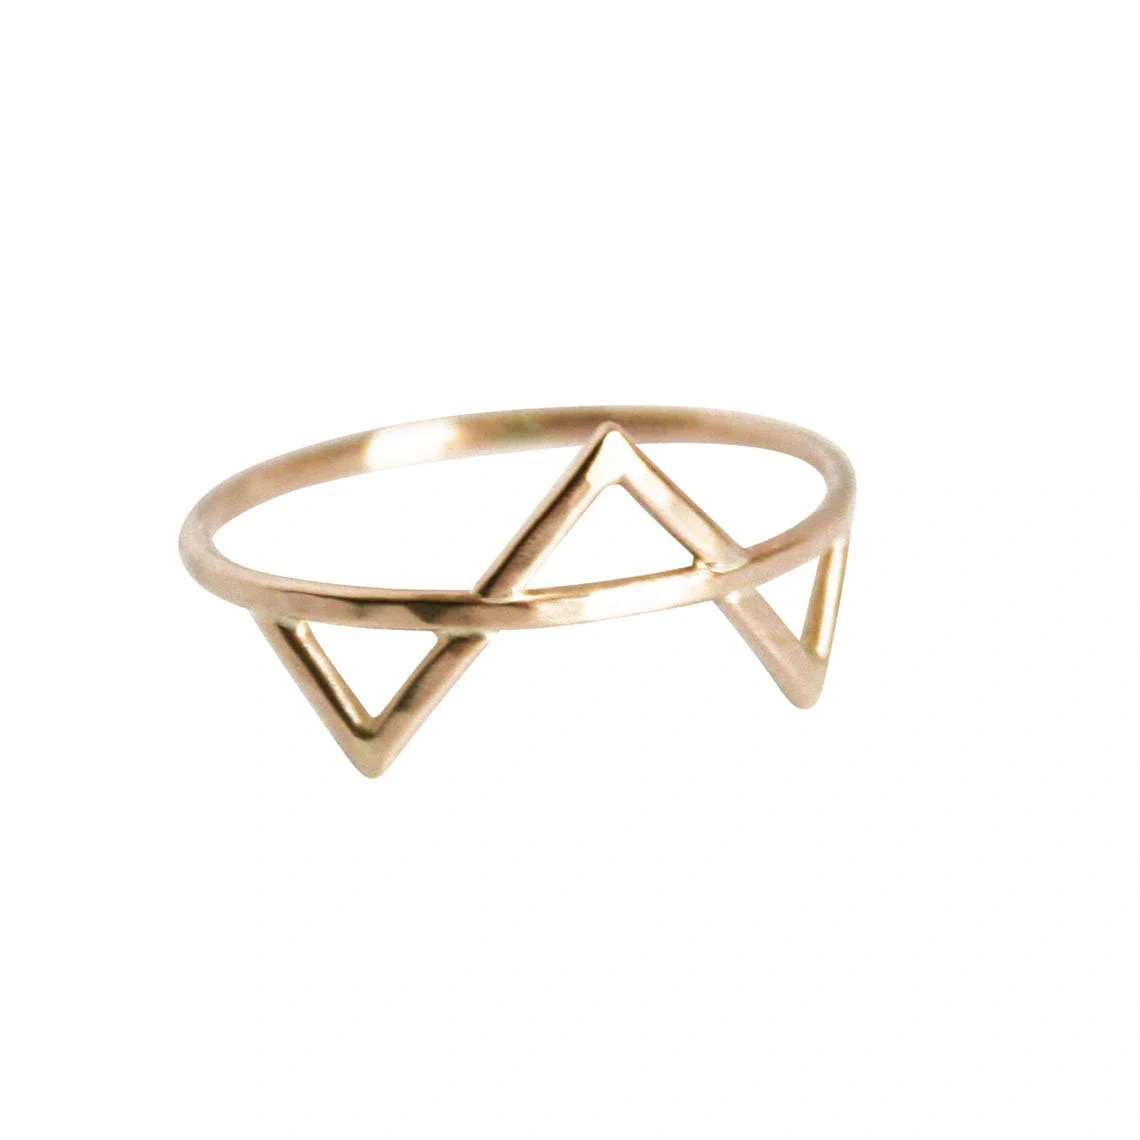 14K Solid Gold 3 Spikes Handmade Plain Stacking Ring Modernist Dainty Stacking Minimalist Jewelry Boho Style Statement Three Spike Ring-10 3/4 US/Uk size – V-3